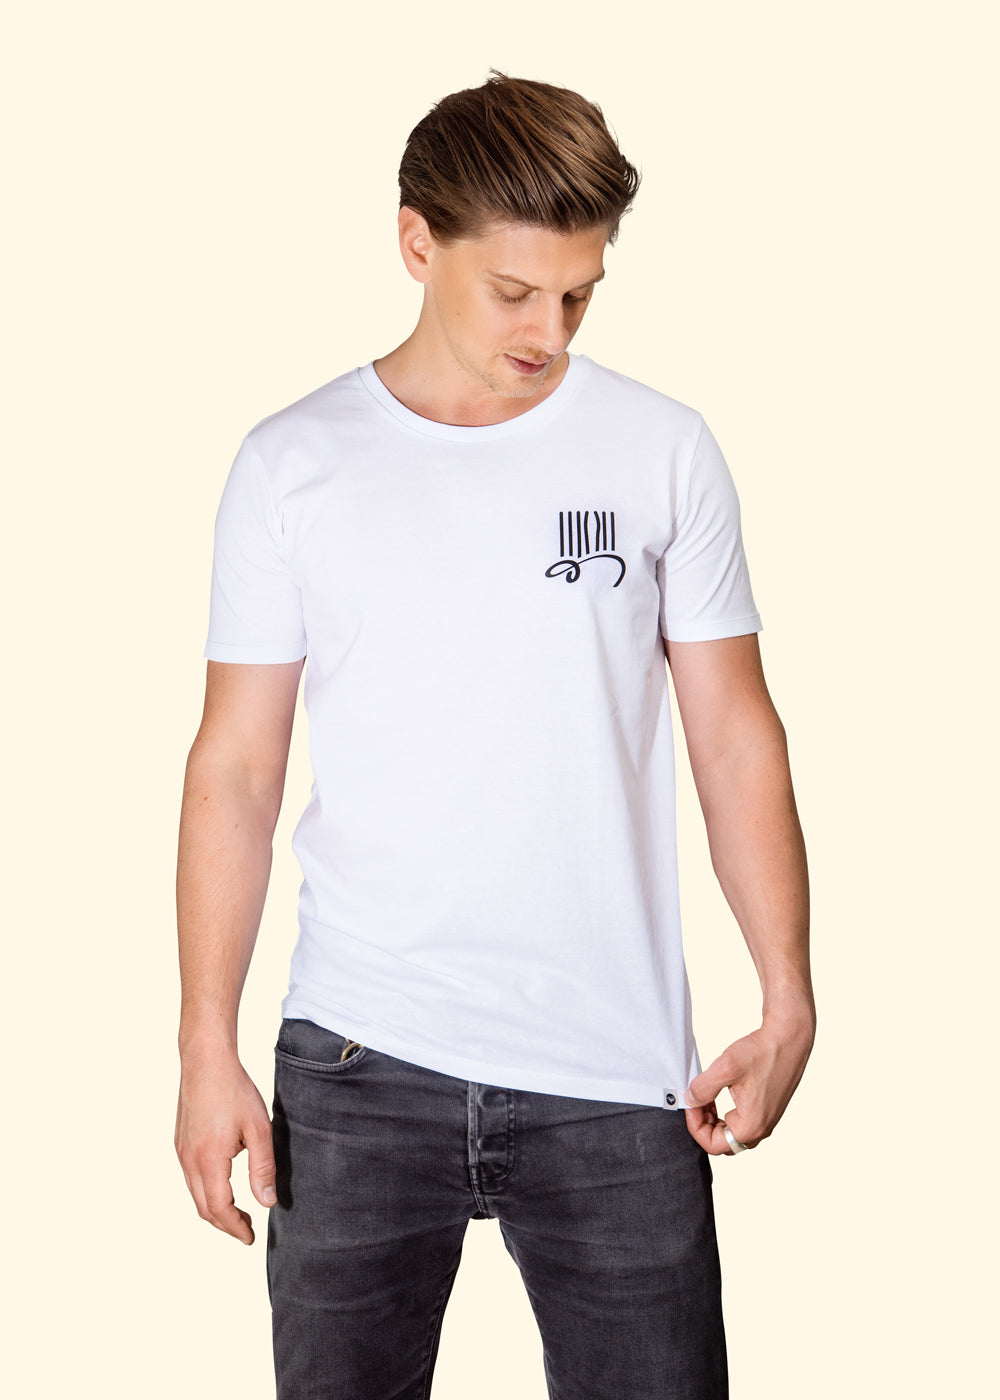 «prison-bars» logo tee - oldpassion - from prison with love